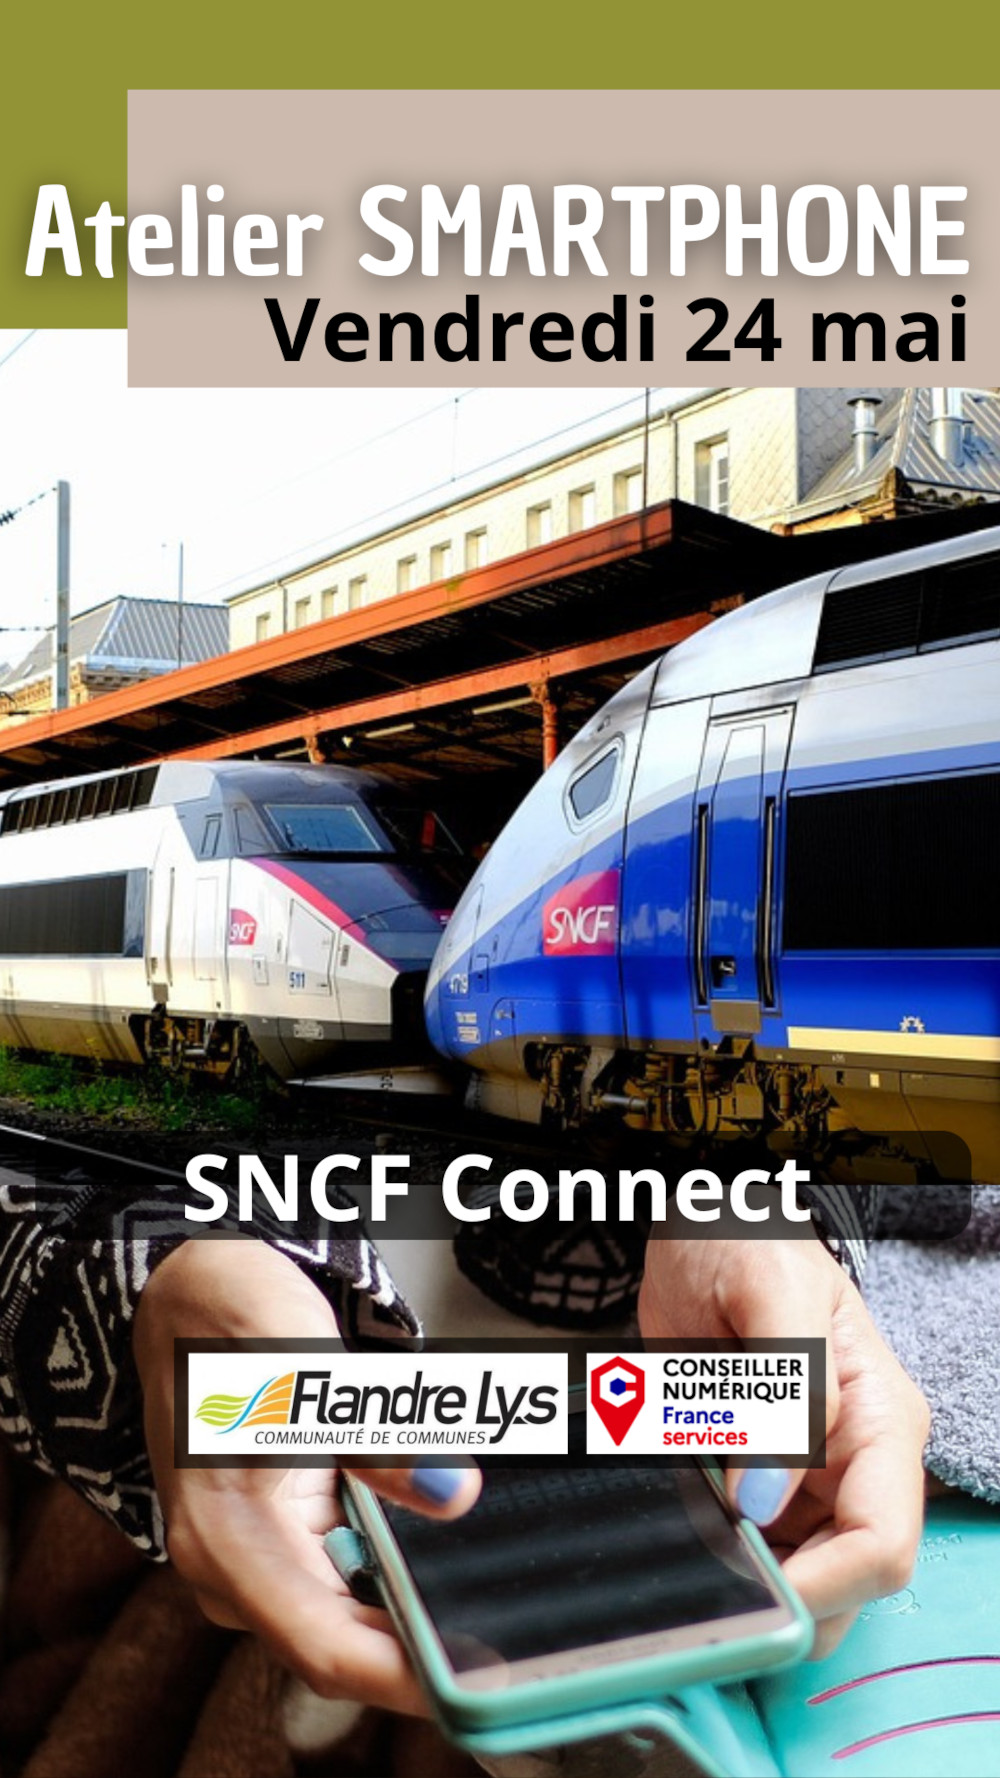 Atelier SMARTPHONE "SNCF Connect"